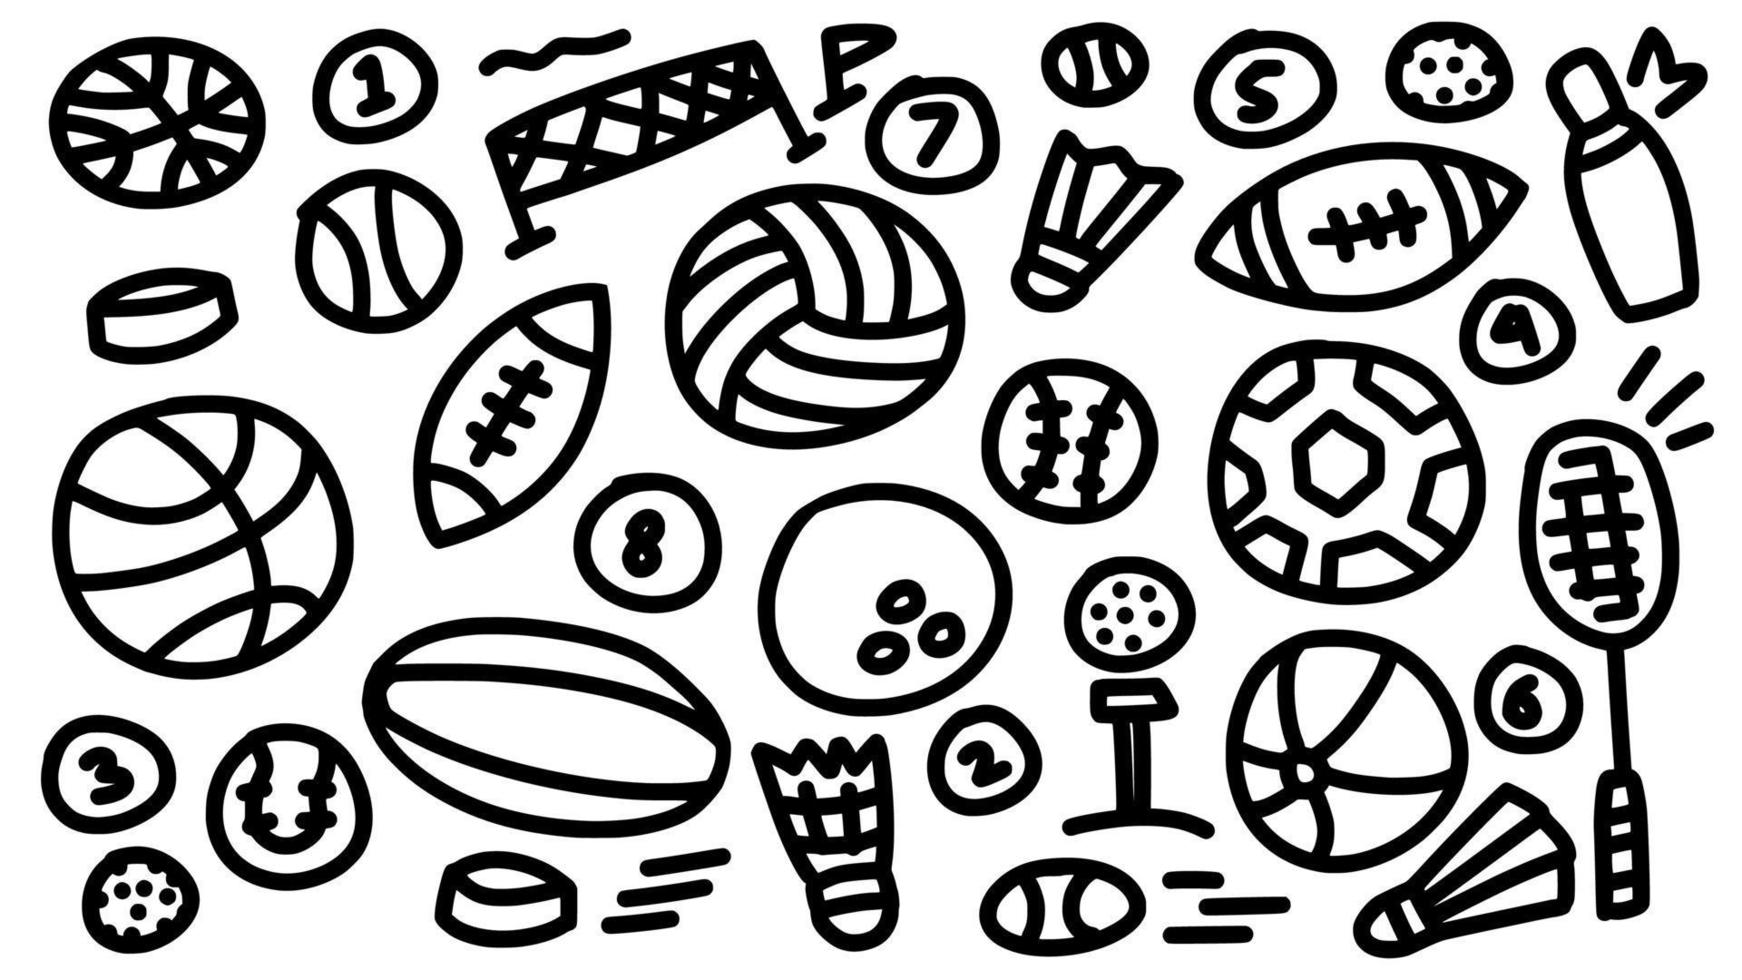 ball sport equipment collection icon set hand drawn doodle outline vector template illustration collection for sport education and coloring book